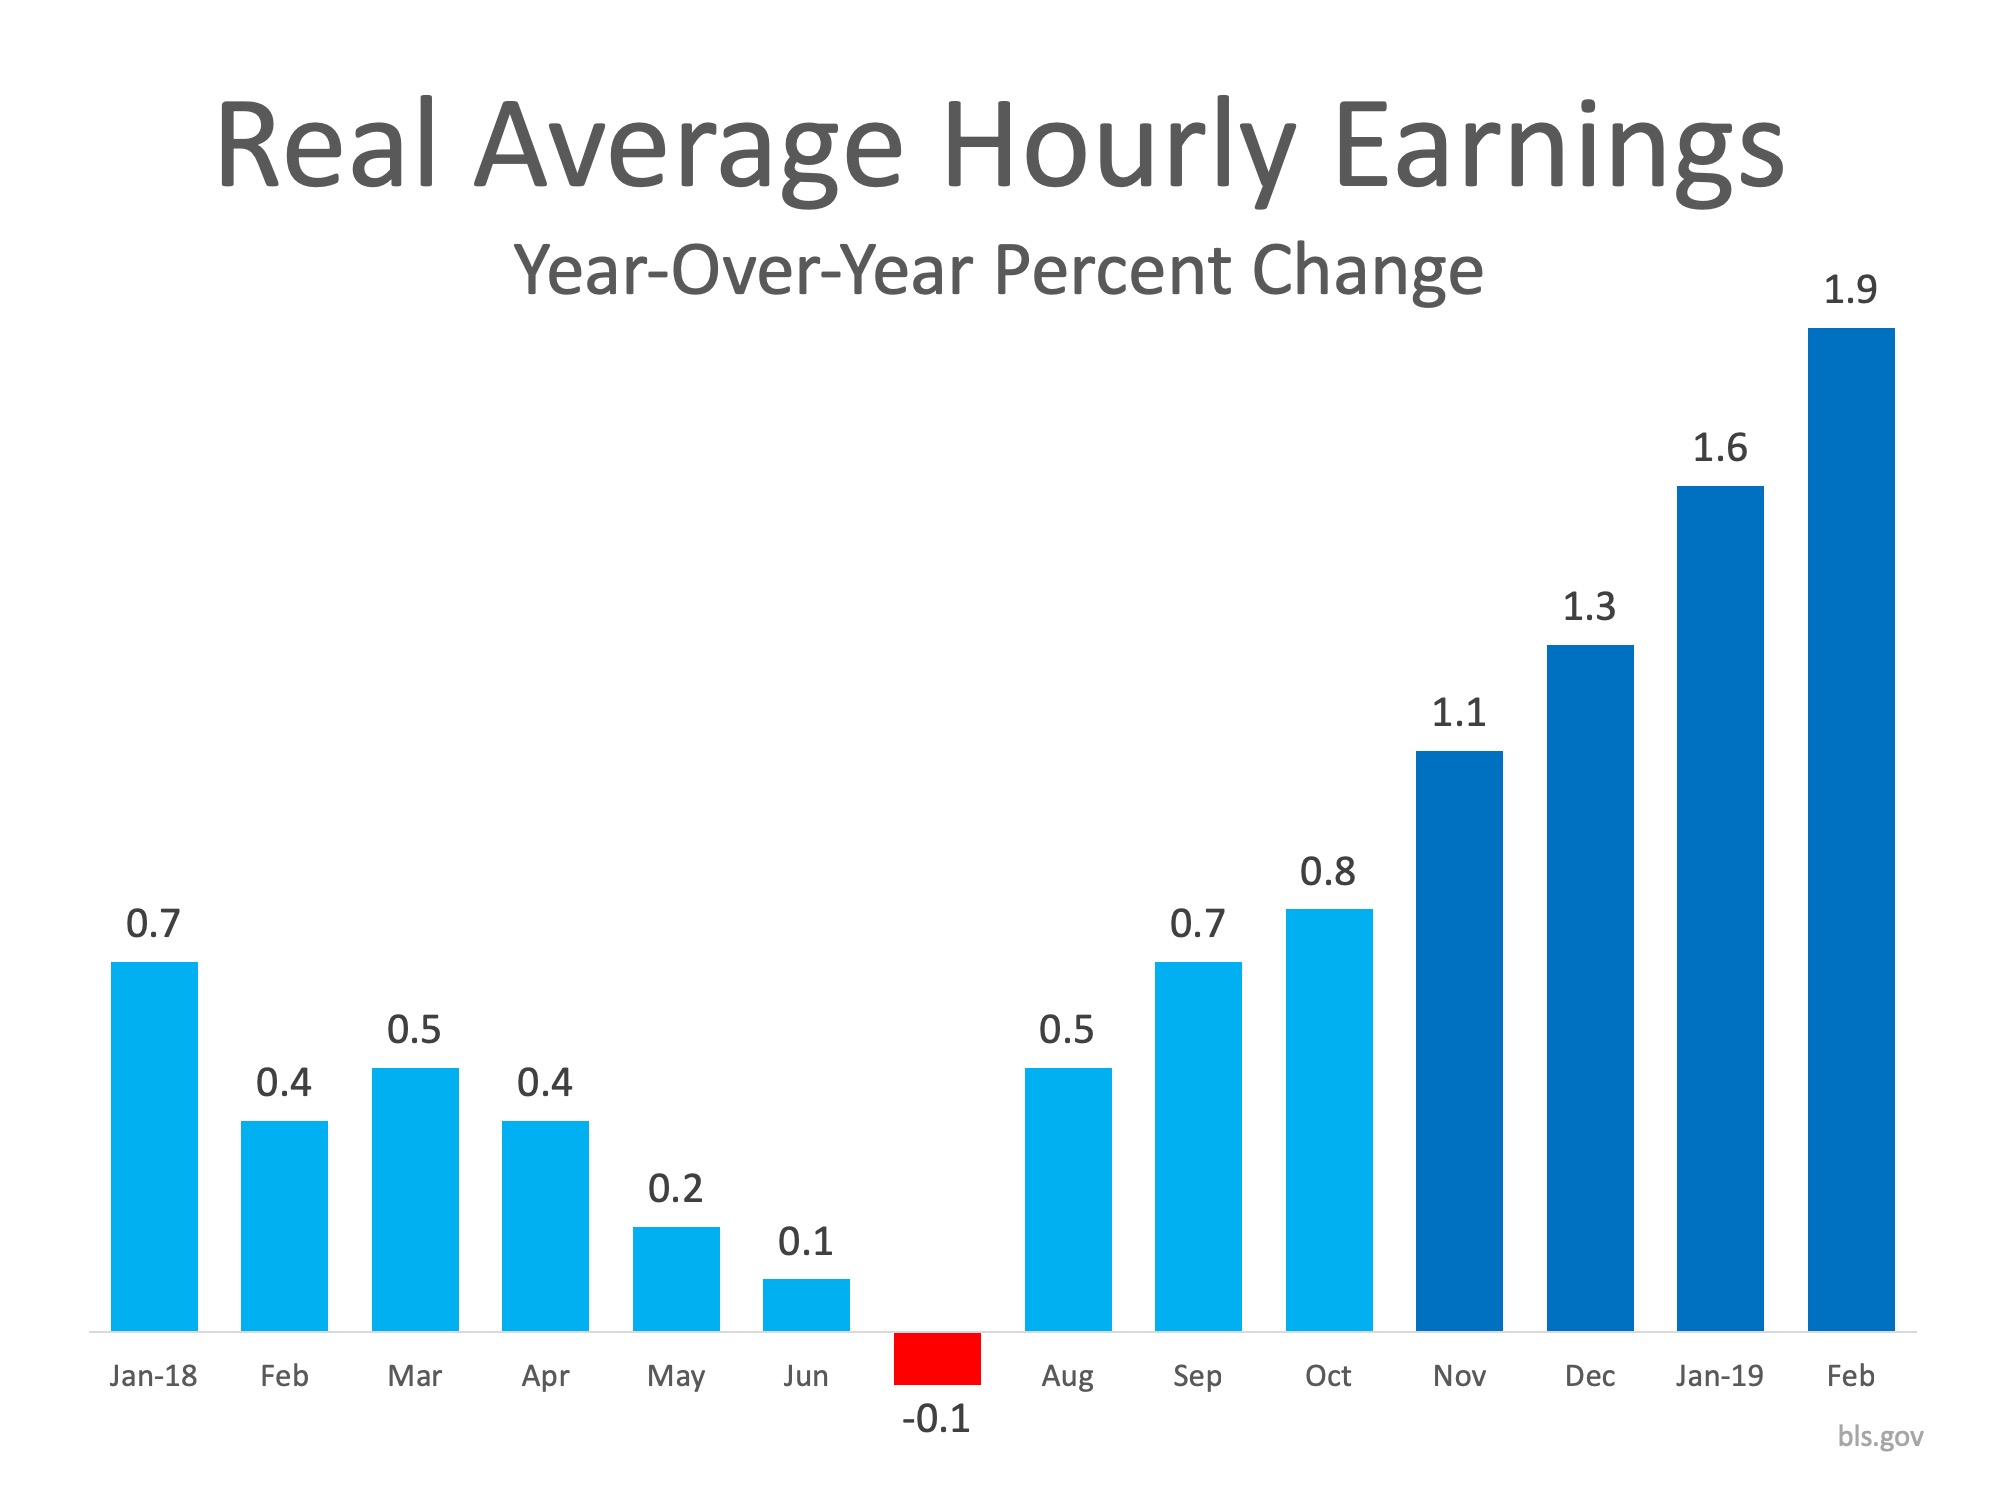 Real average hourly earnings - year-over-year percentage change infographic